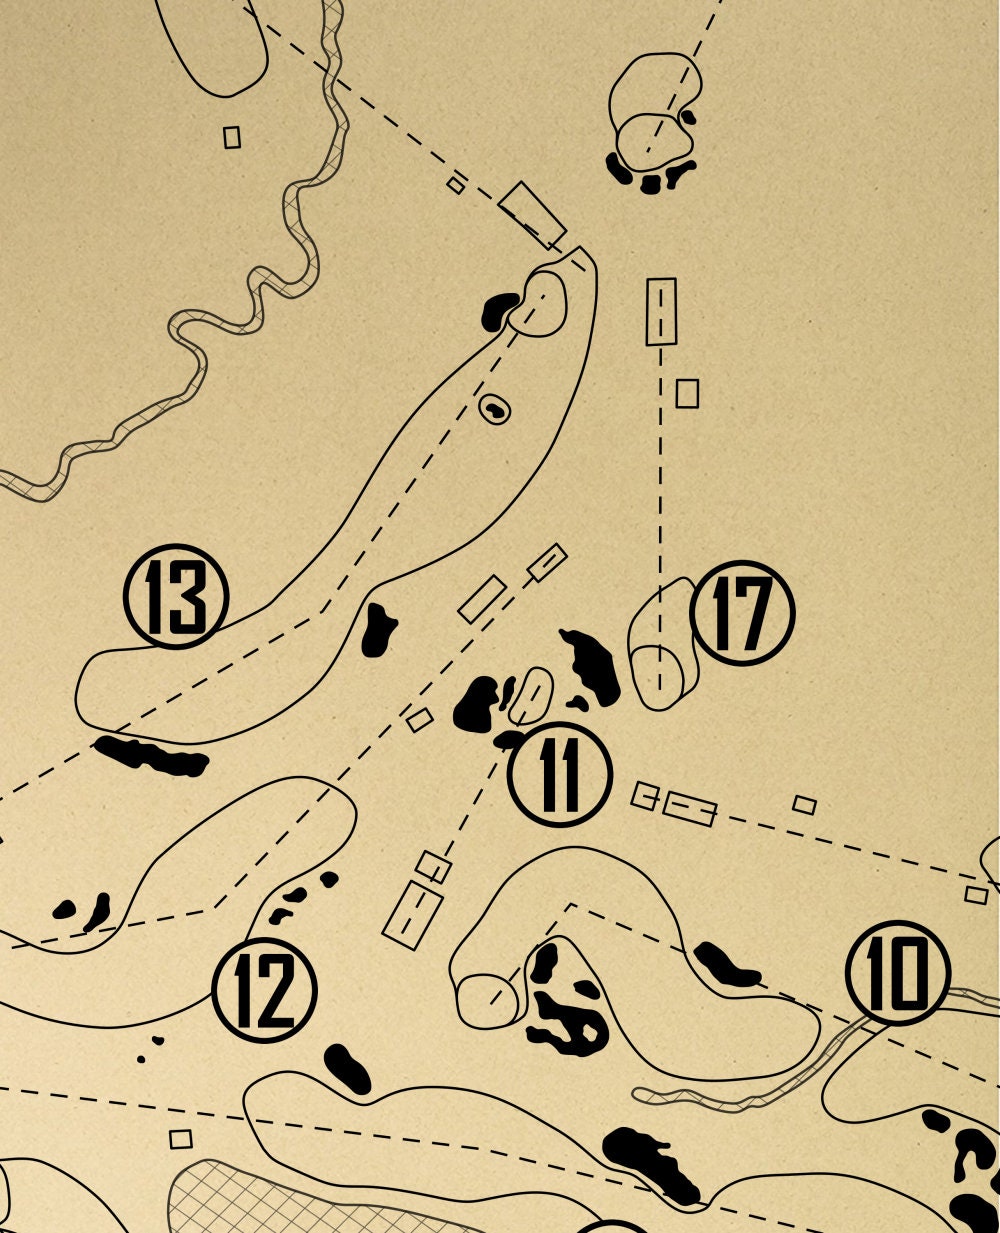 Arcadia Bluffs South Course Outline (Print)